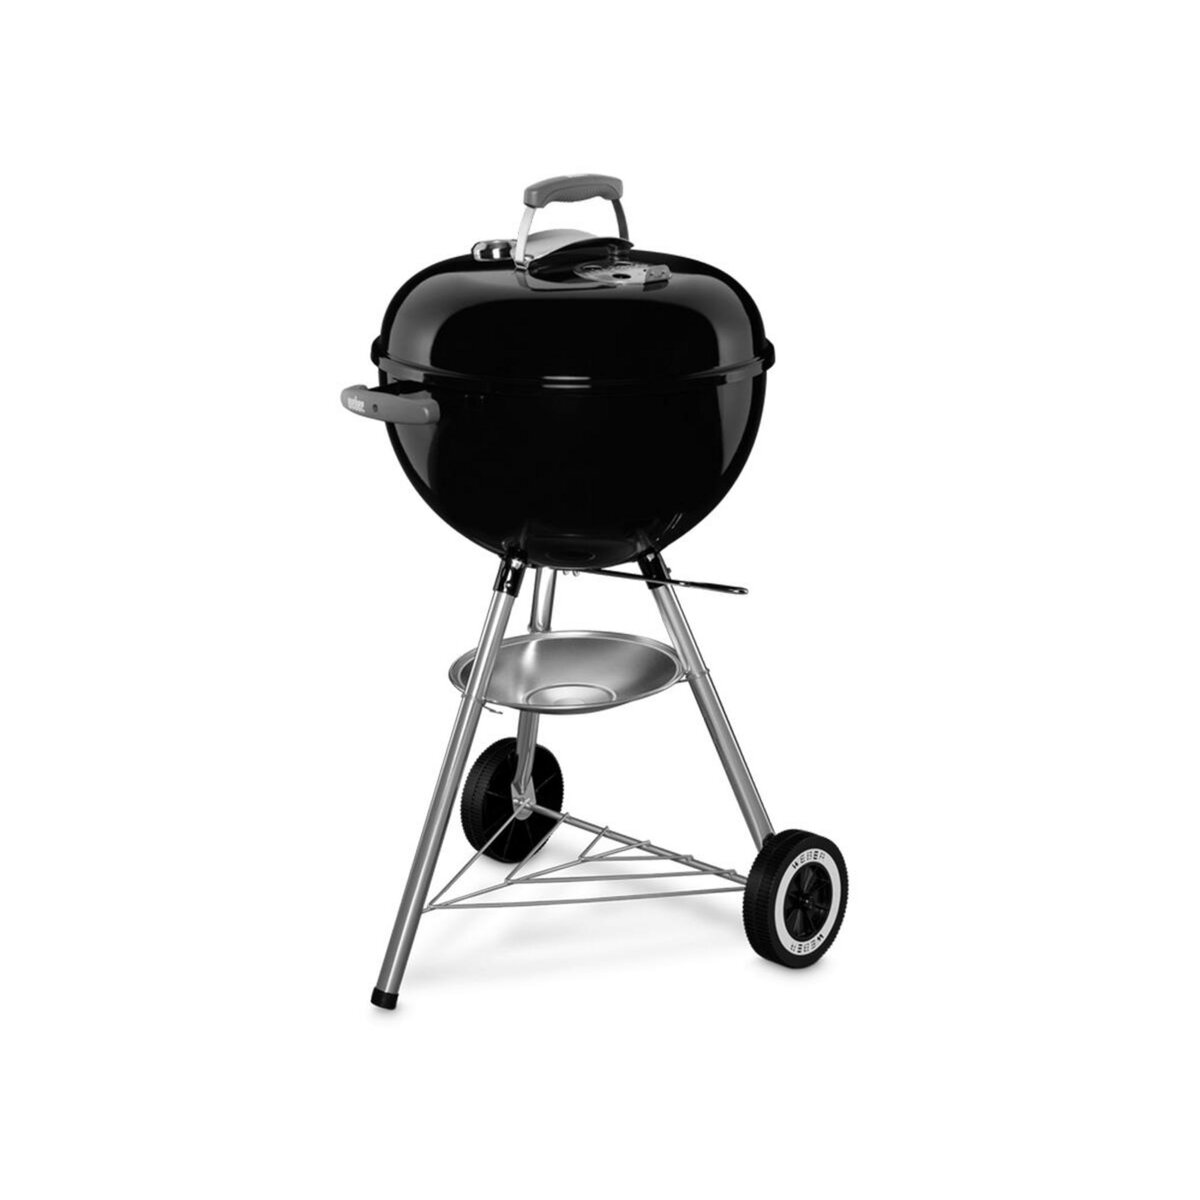 Barbecue charbon WEBER Performer GBS barbecue charbon Ø 57 cm Pas Cher 